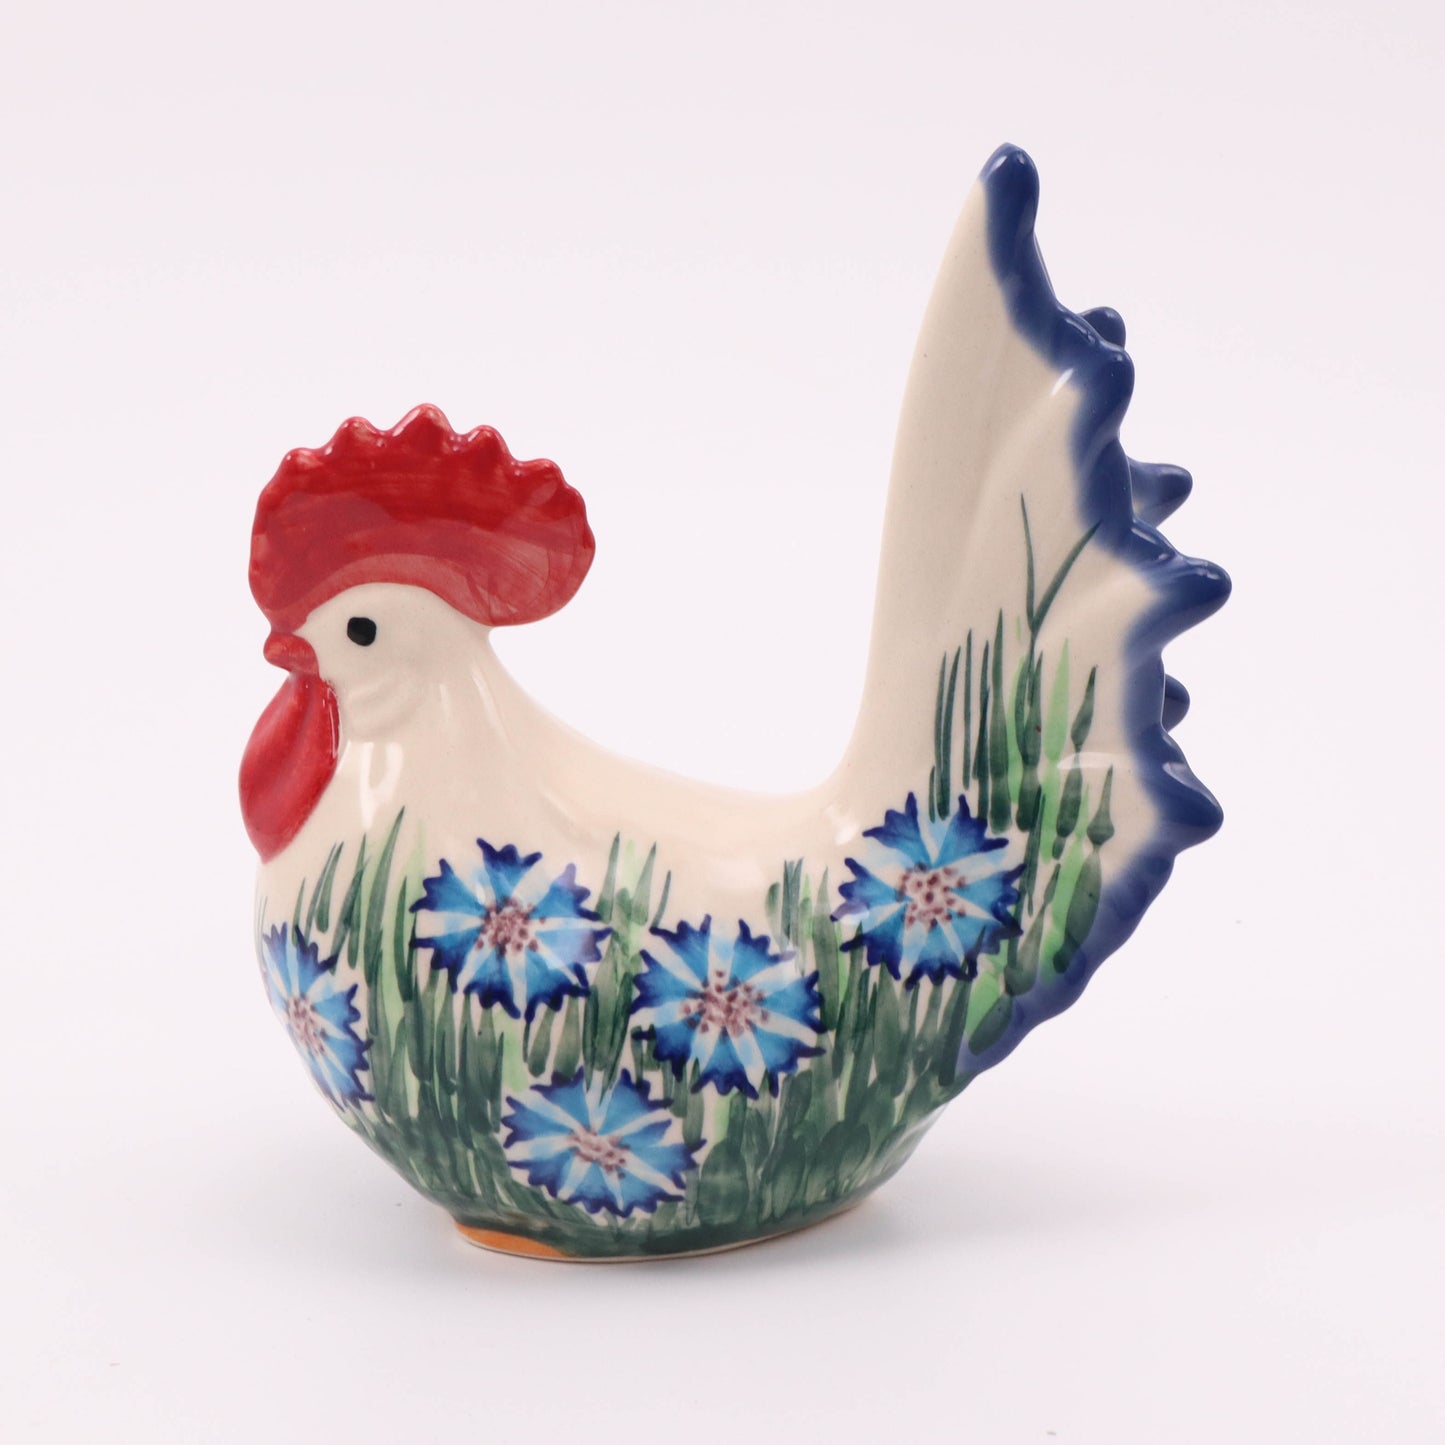 6"x7" Sitting Rooster. Pattern: Chicory